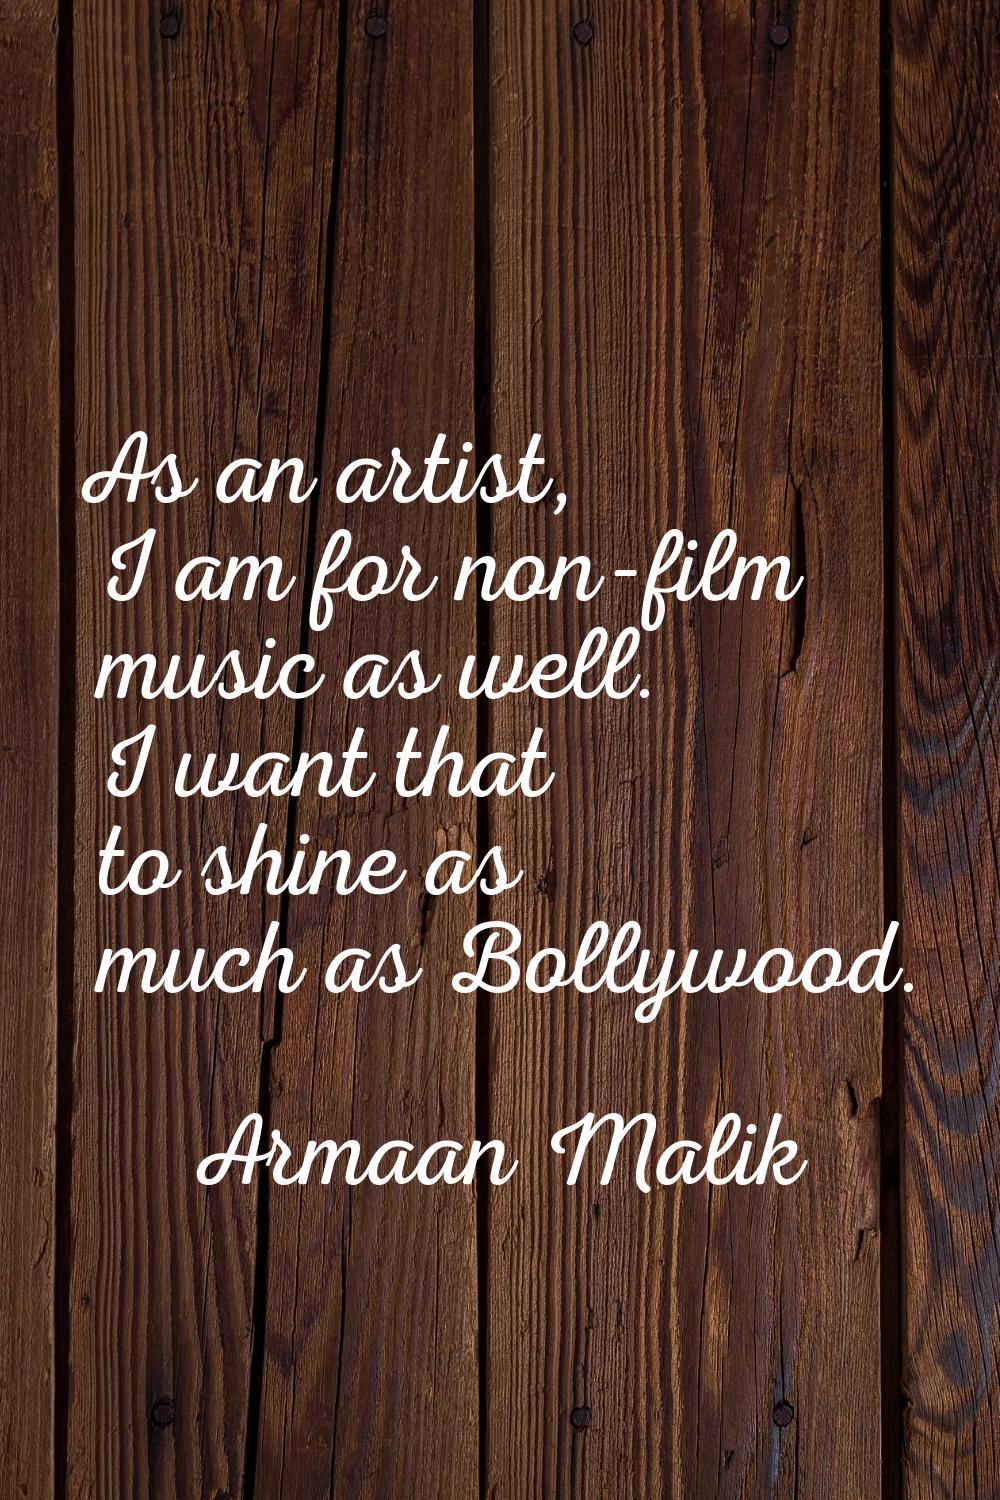 As an artist, I am for non-film music as well. I want that to shine as much as Bollywood.